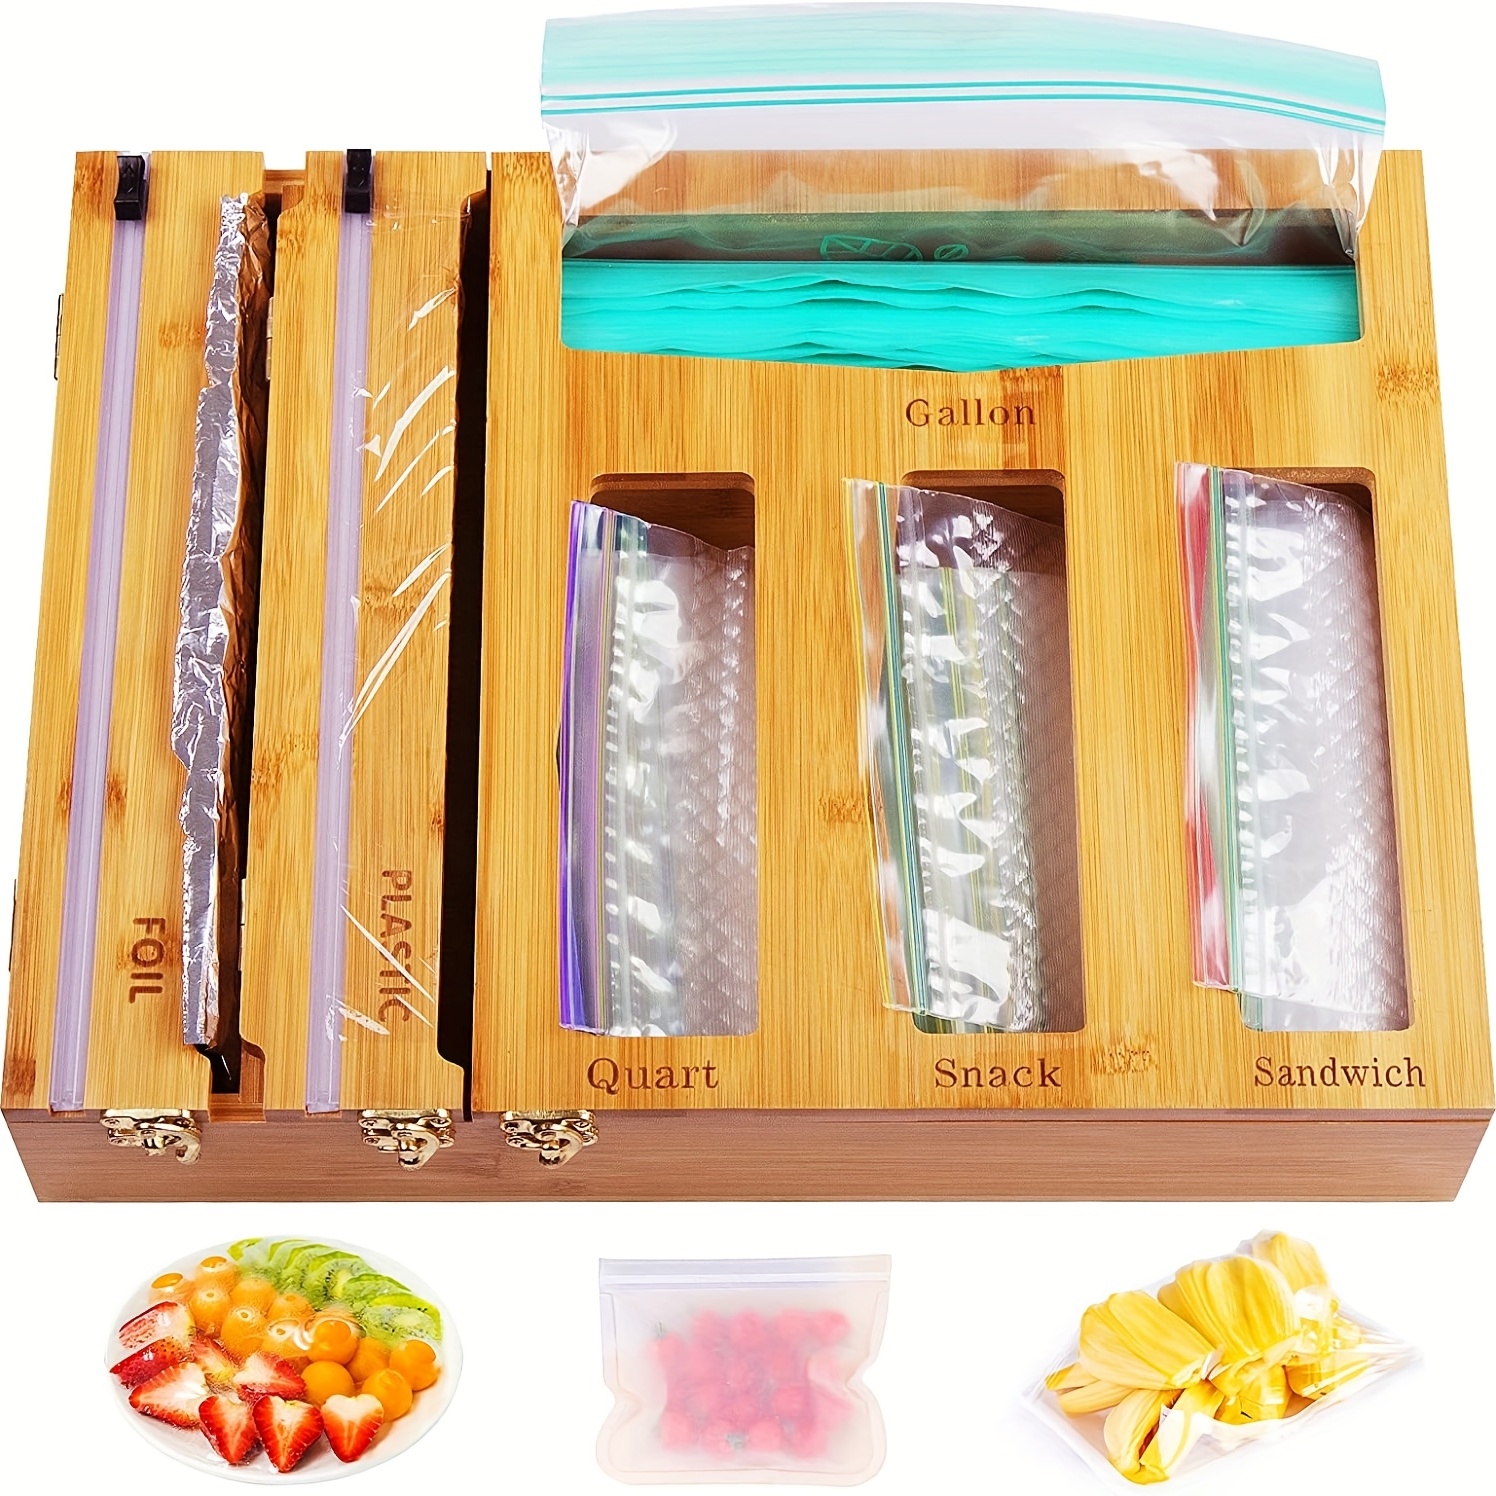 Bamboo Storage Bag With 1/2 Cutter, Foil And Plastic Wrap Organizer,  Finishing Storage Box, Ziplock Bag Storage Organizer For Kitchen Drawer,  Compatible With Gallon, Quart, Sandwich And Snack Variety Size Bag, Kitchen